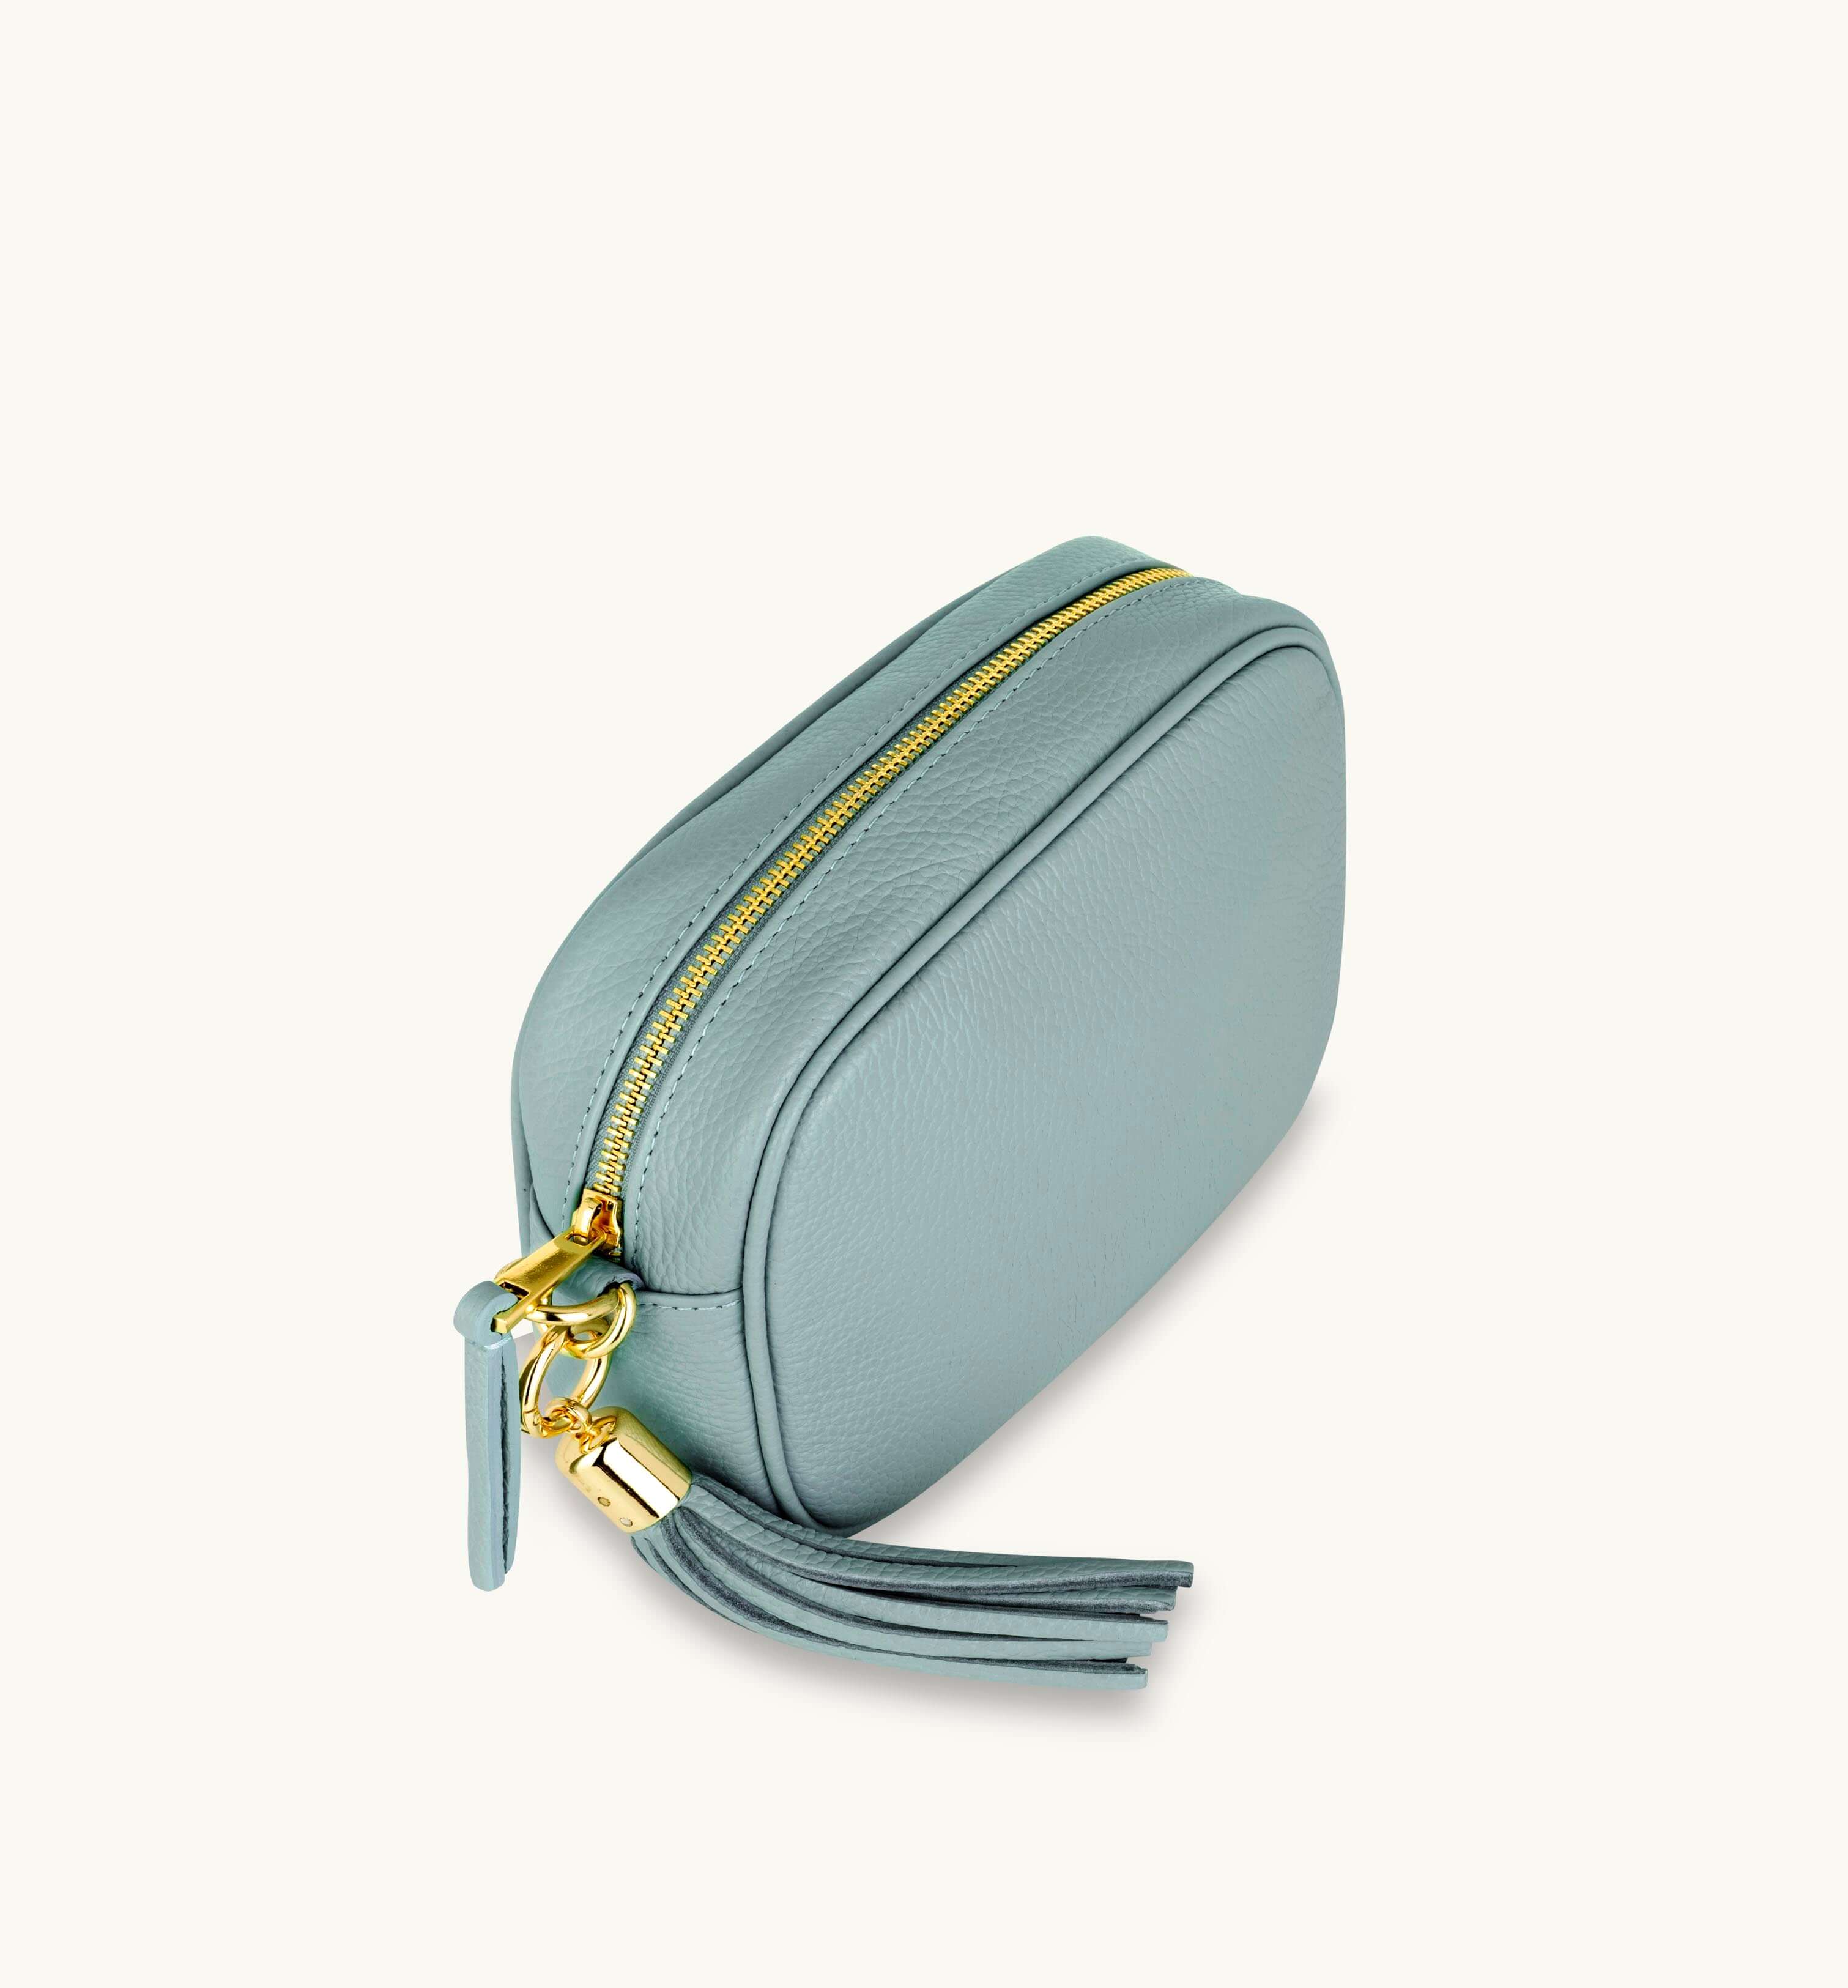 The Tassel Pale Blue Leather Crossbody Bag With Gold Chain Strap